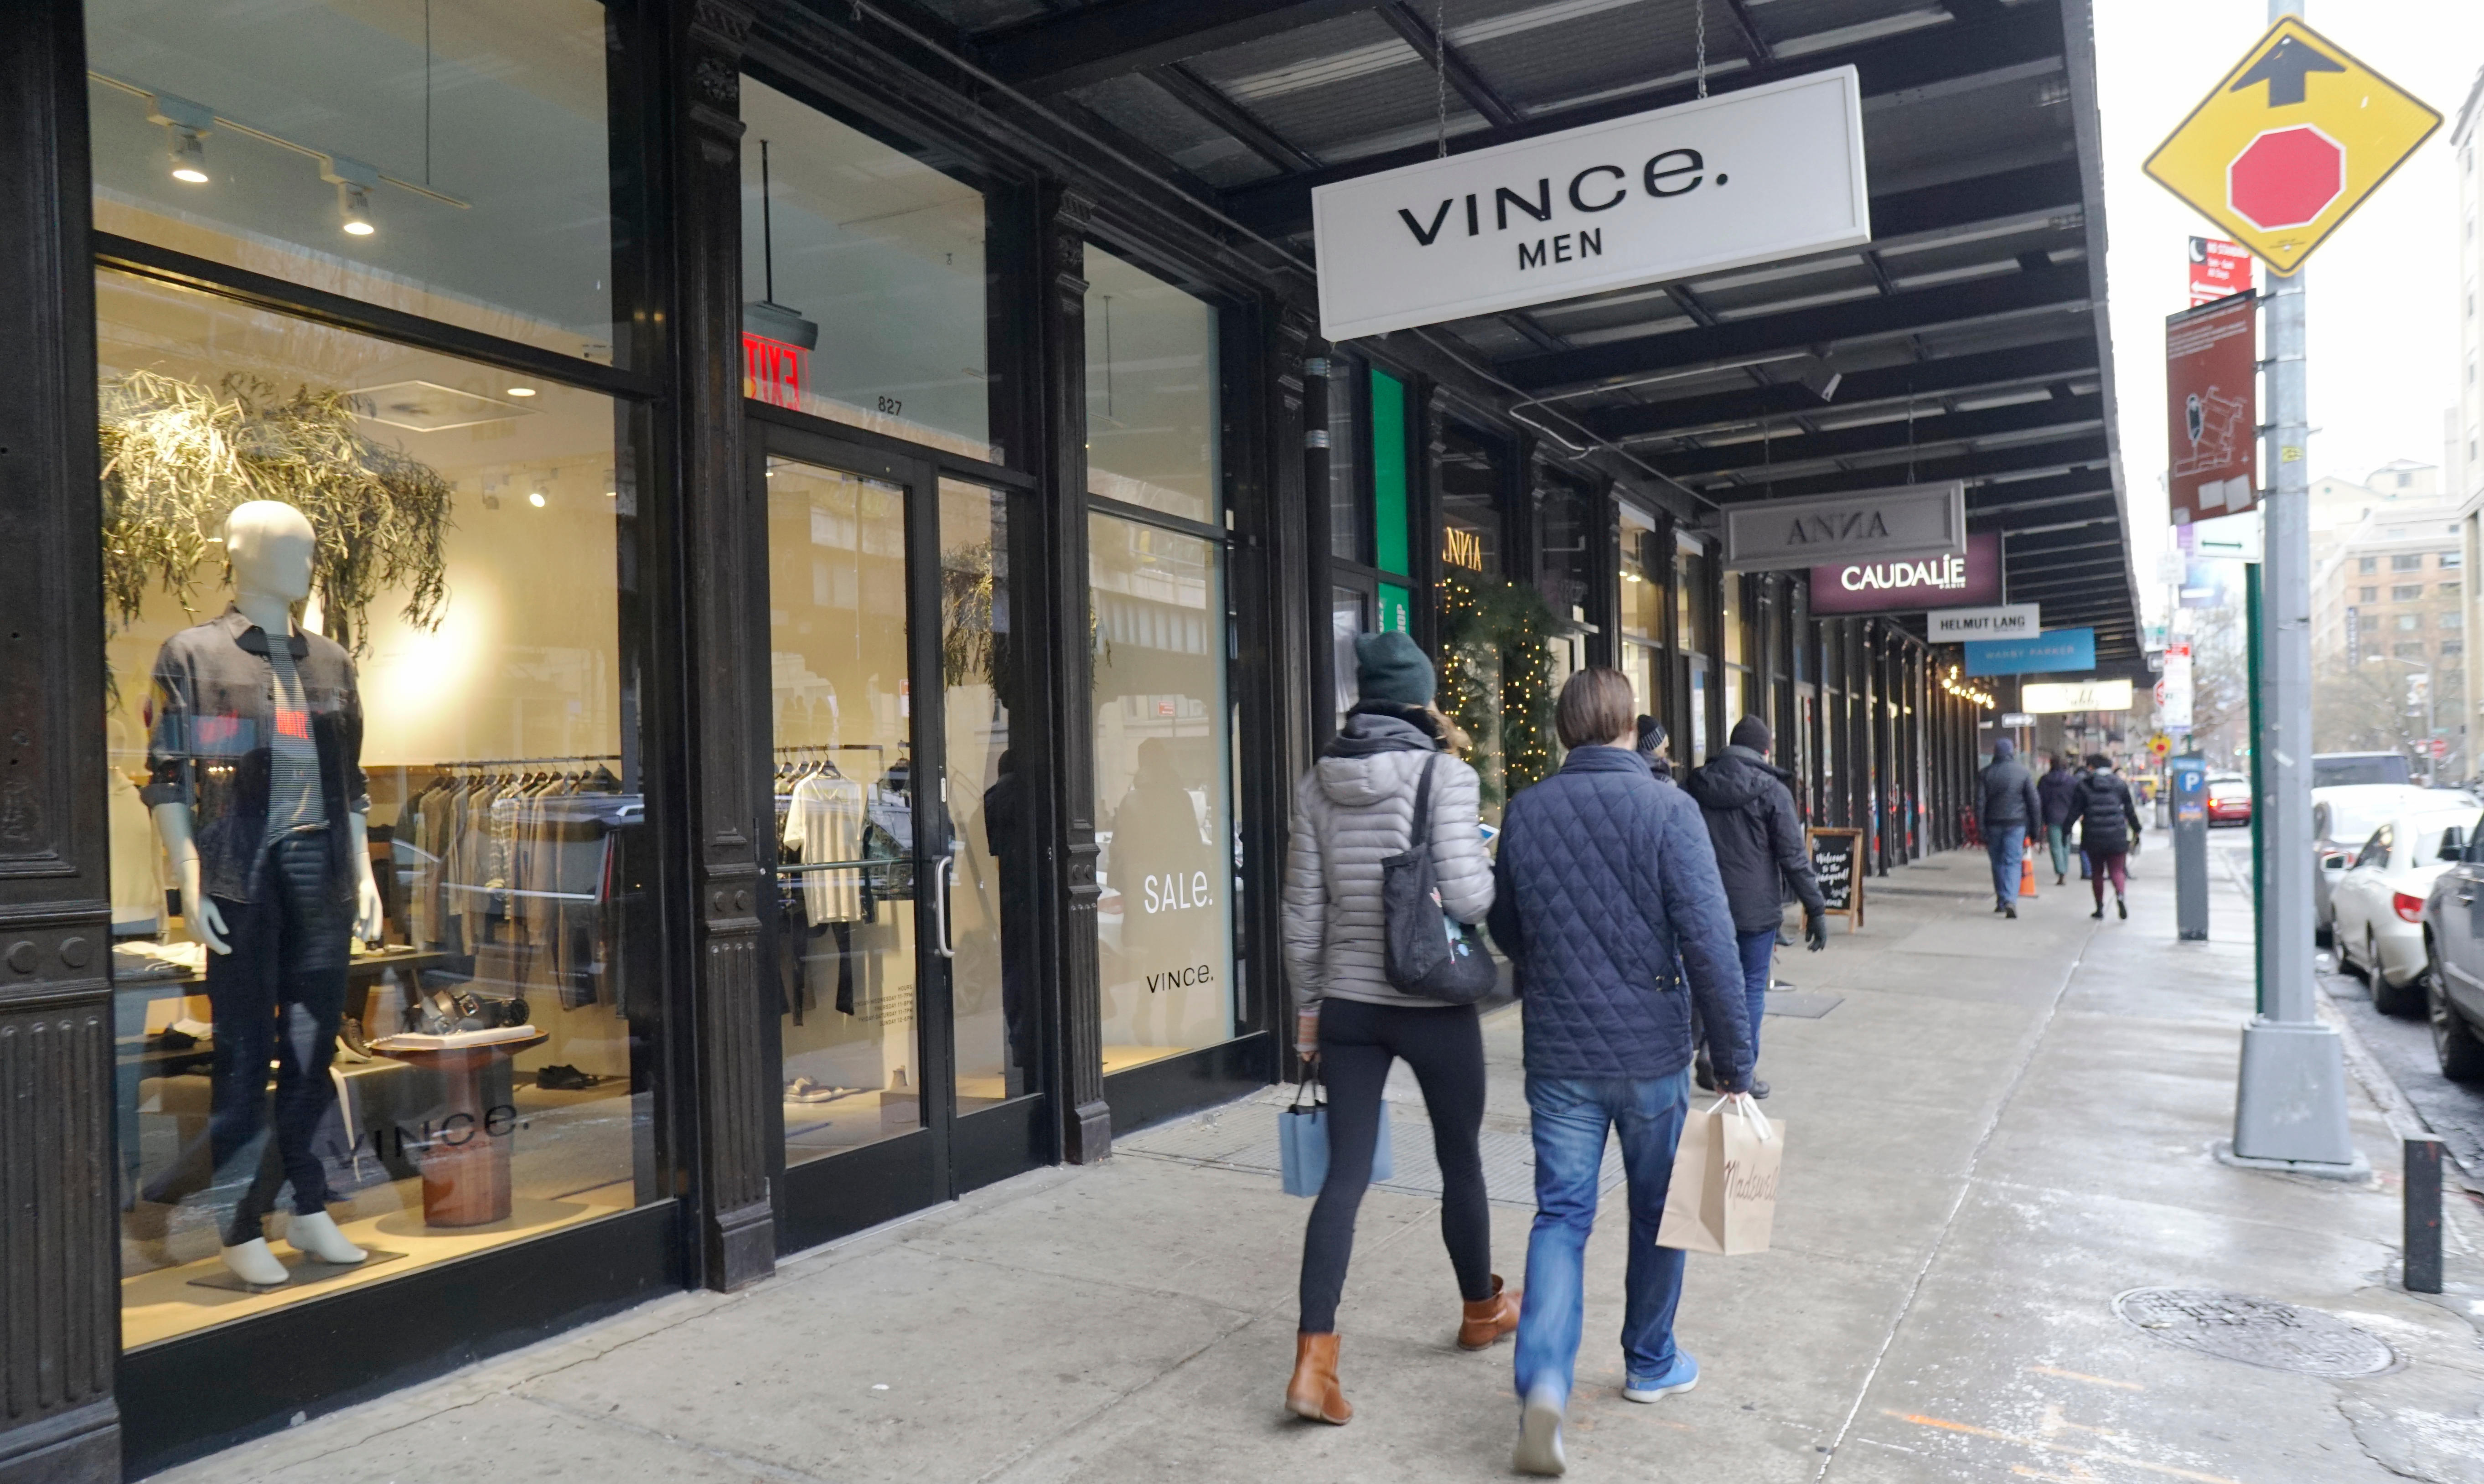 A Vince clothing store in the Meatpacking District in New York on Saturday, December 16, 2017. Vince is on the list of struggling retailers such as Charlotte Russe and Nine West that are suffering from reduced foot traffic as shoppers gravitate towards on